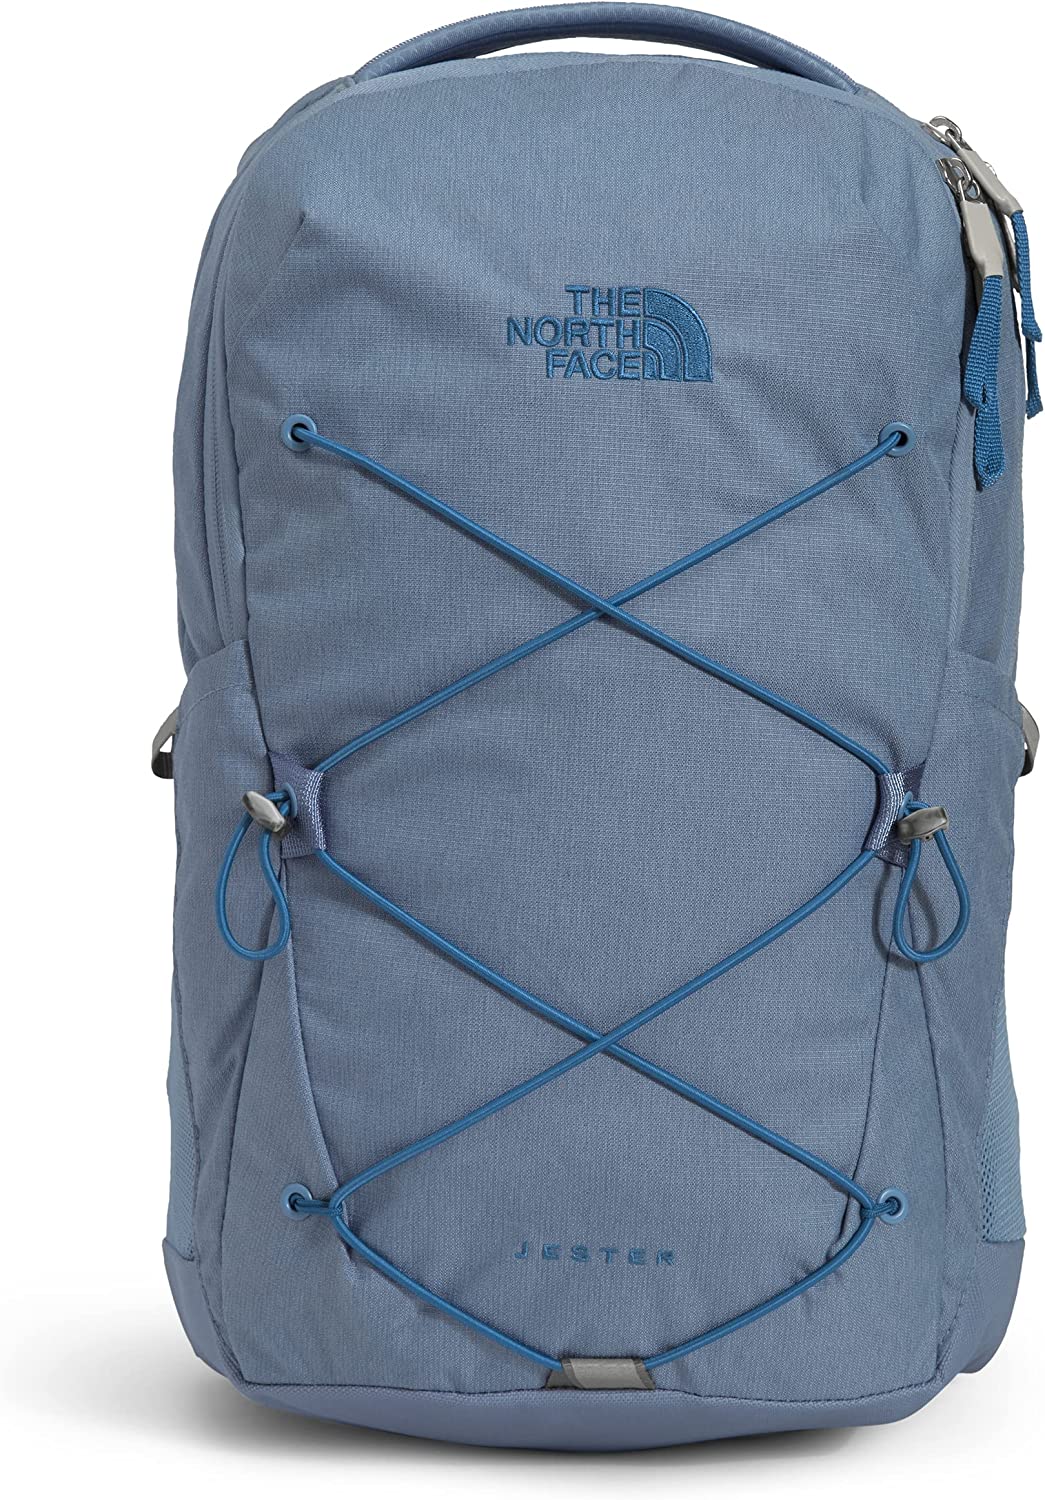 Ritmisch autobiografie Frustratie The North Face Women's Jester School Laptop Backpack – I-Max Fashions